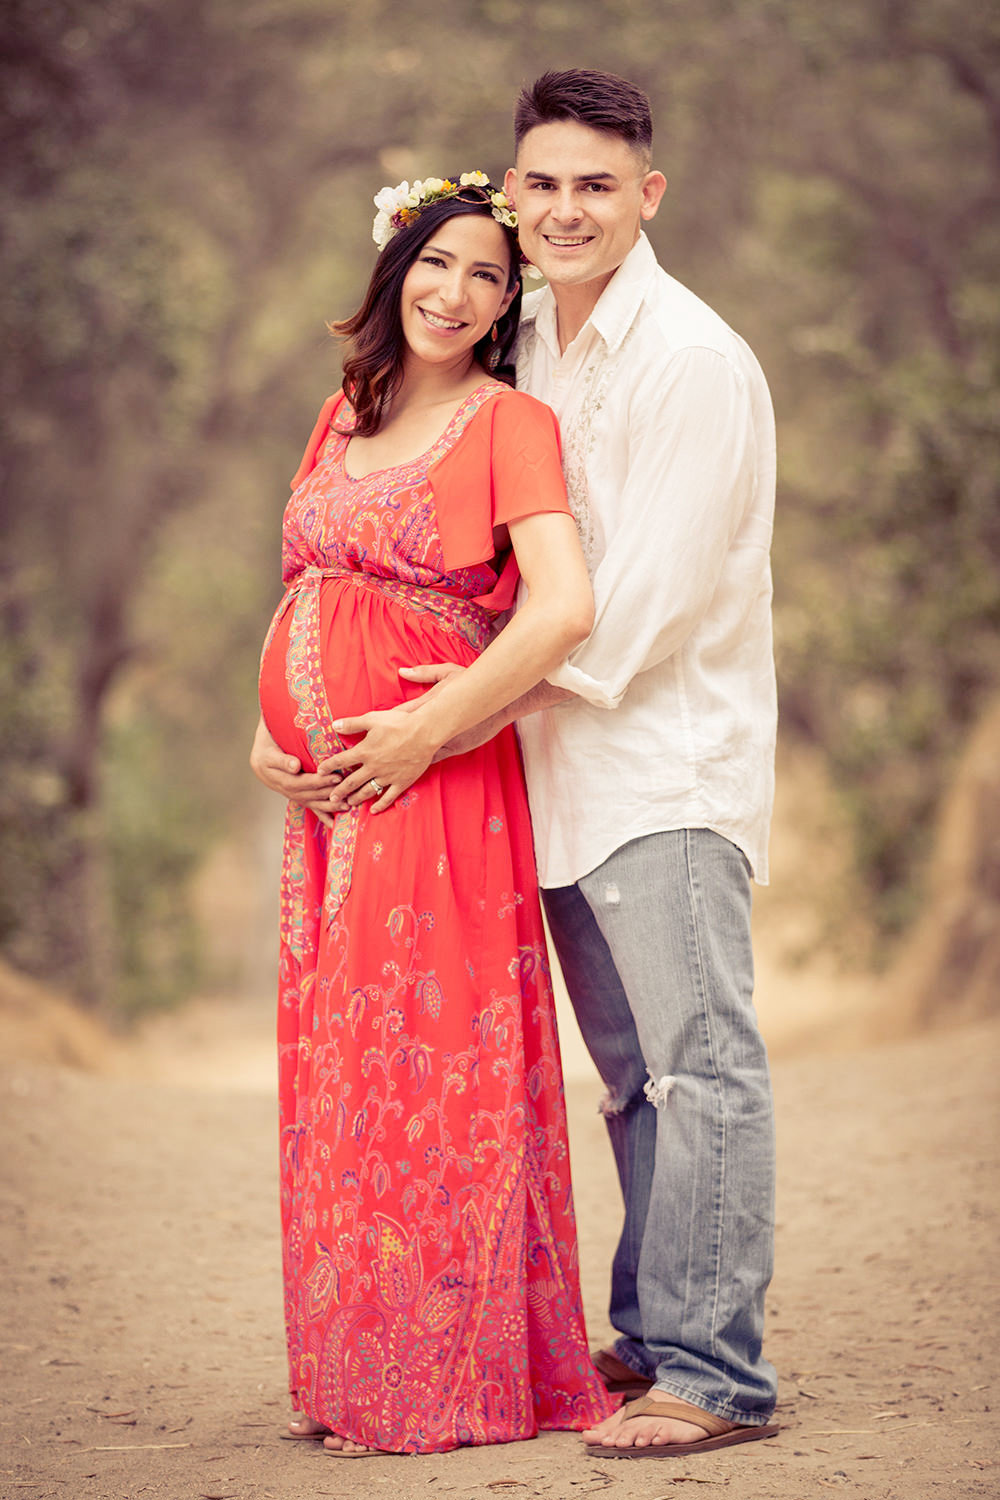 Holding the belly pose in San Diego for this Maternity Session.